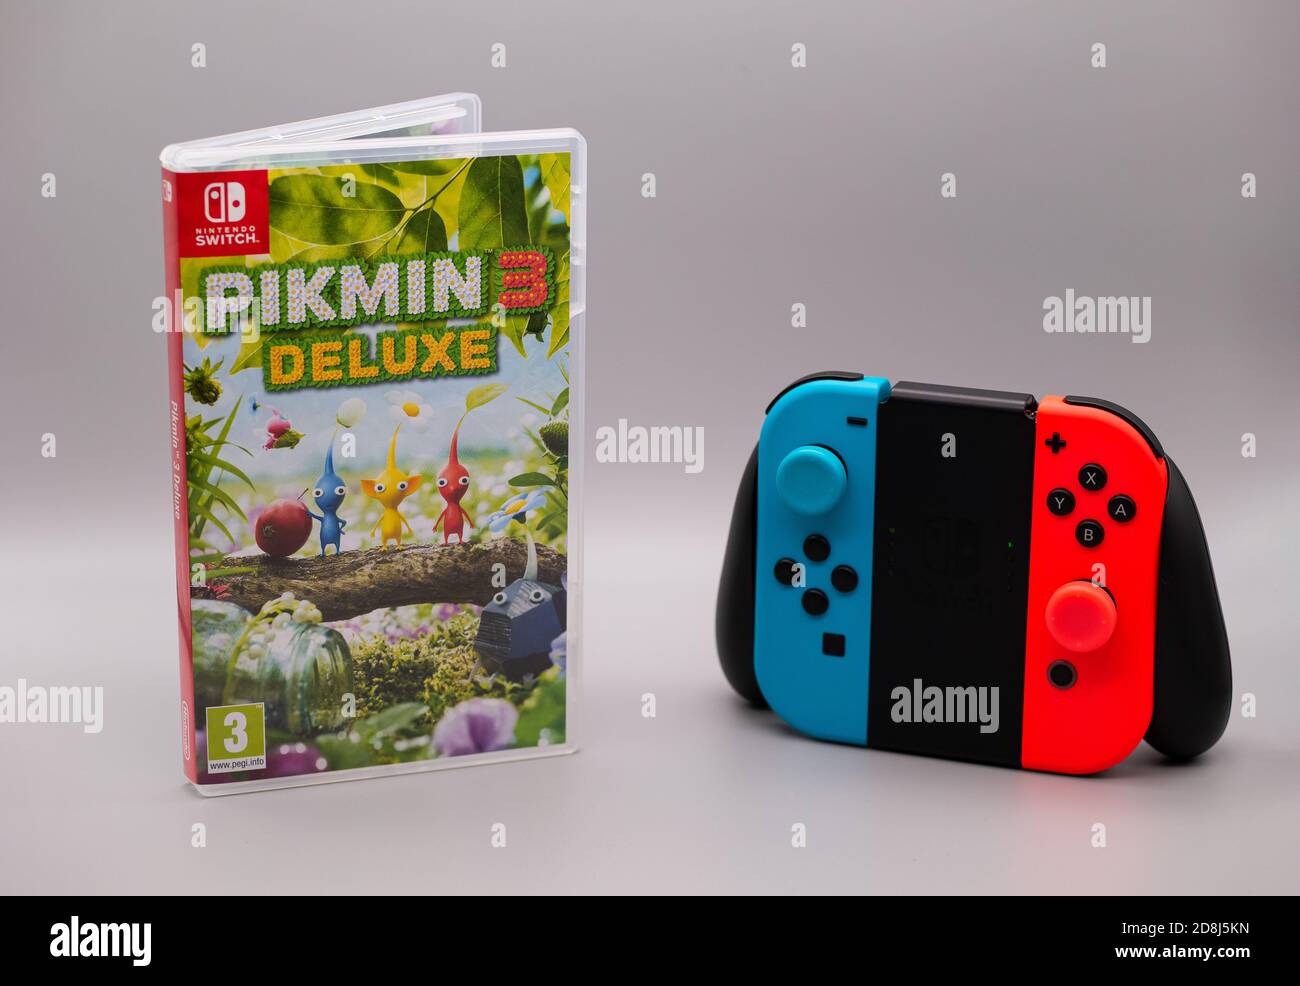 Oct 30th 2020, UK - Pikmin 3 Deluxe Nintendo Switch Game box and joy con  controller Stock Photo - Alamy